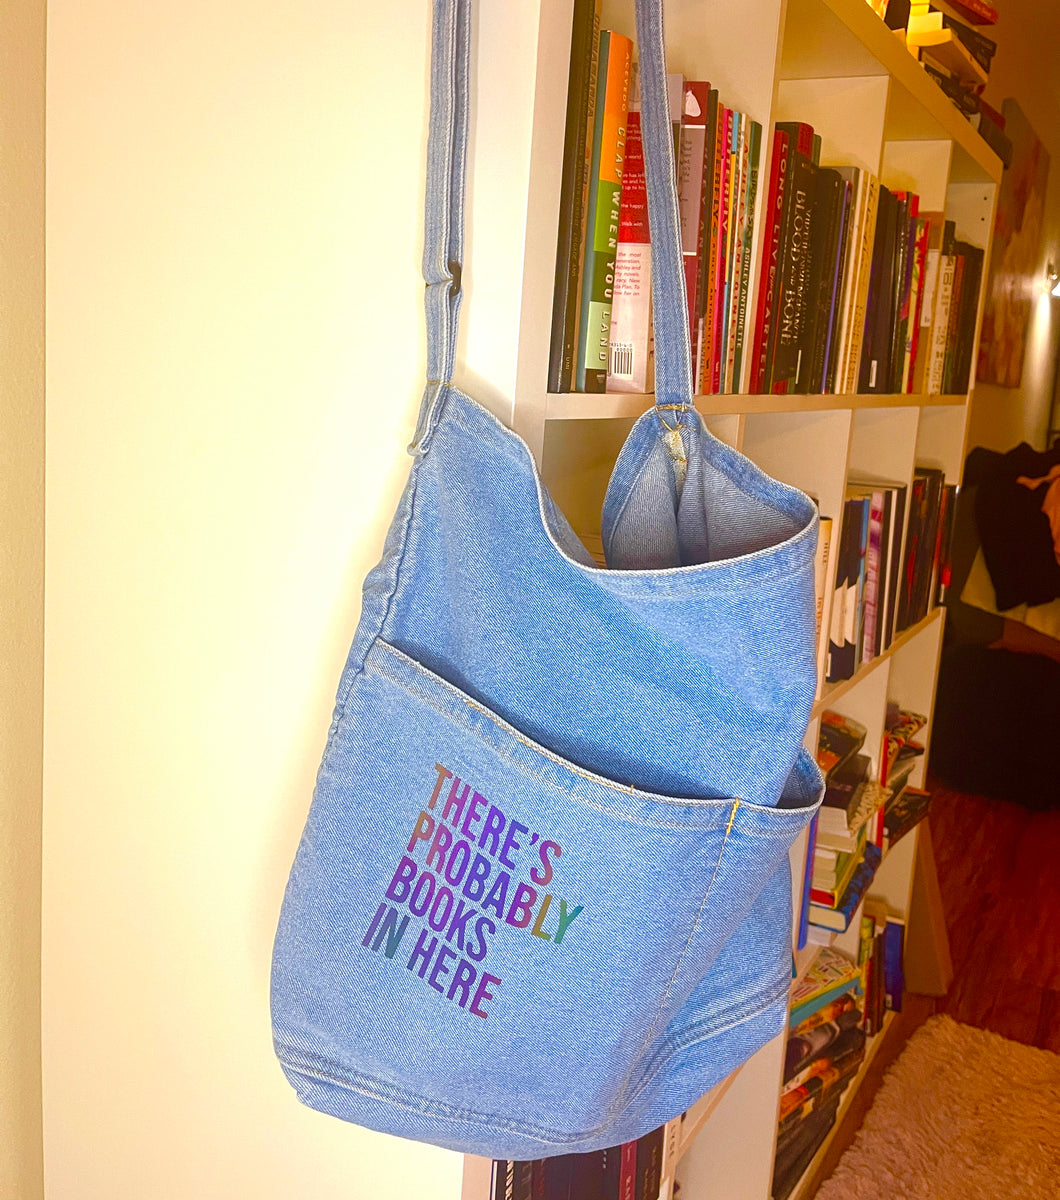 Denim Bag: There's Probably Books in Here